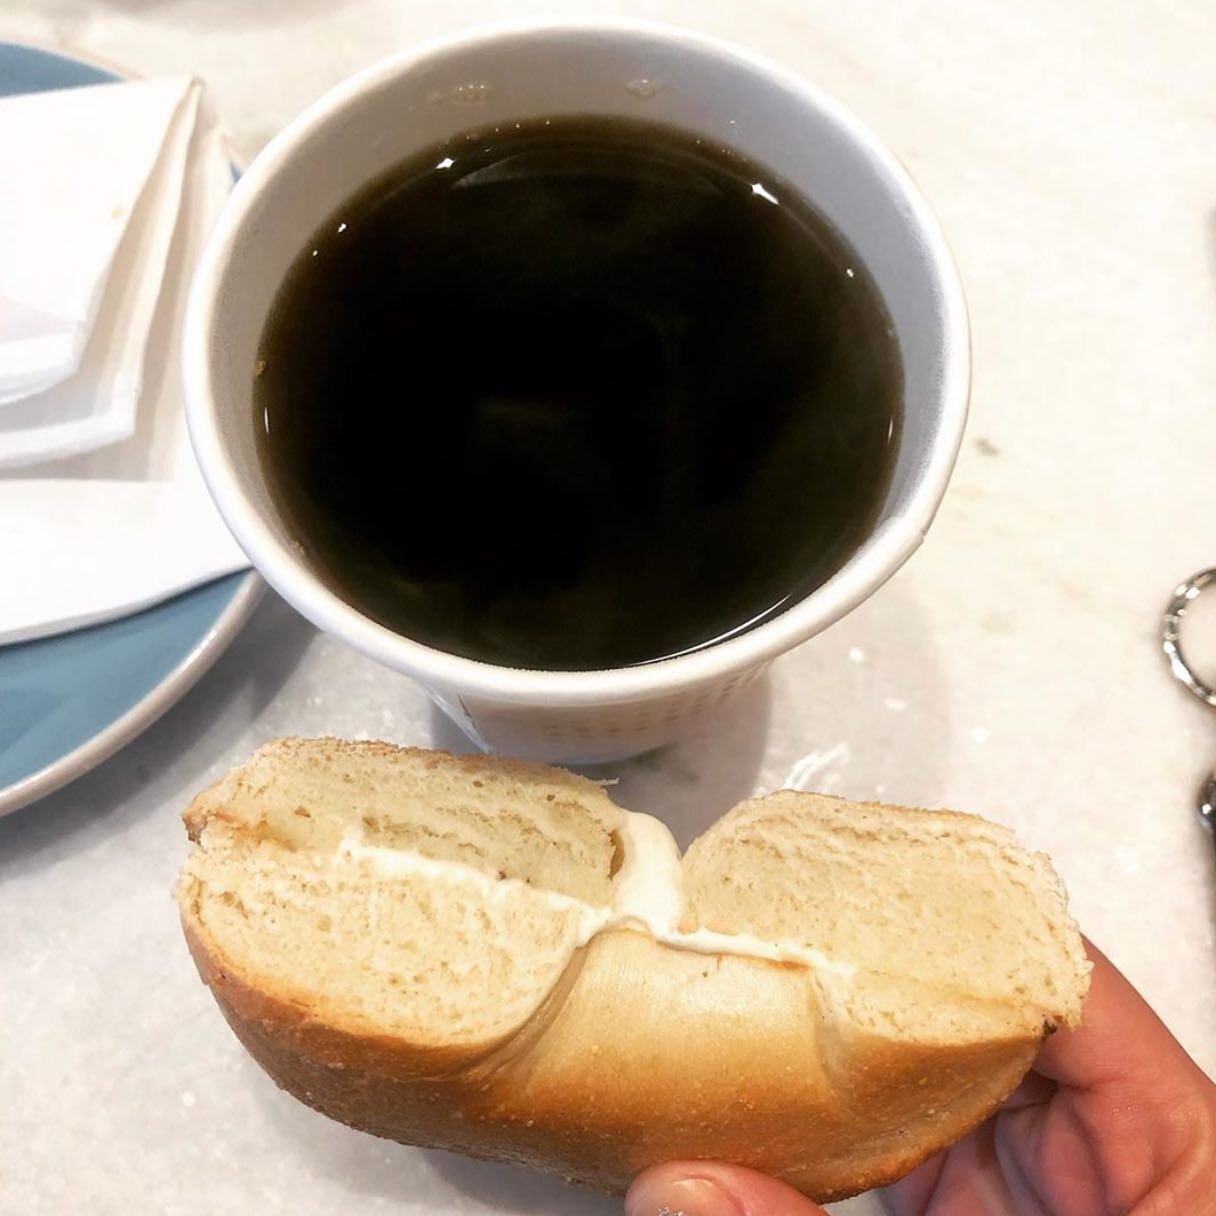 Start your day off on the right foot with the perfect coffee + bagel. We are serving up coffee from local purveyor @vigilantecoffee and bagels from our partner shop @bethesdabagels. Visit us at 425 I Street NW, we&rsquo;re open until 8pm! ☕️ ☕️☕️ #ch